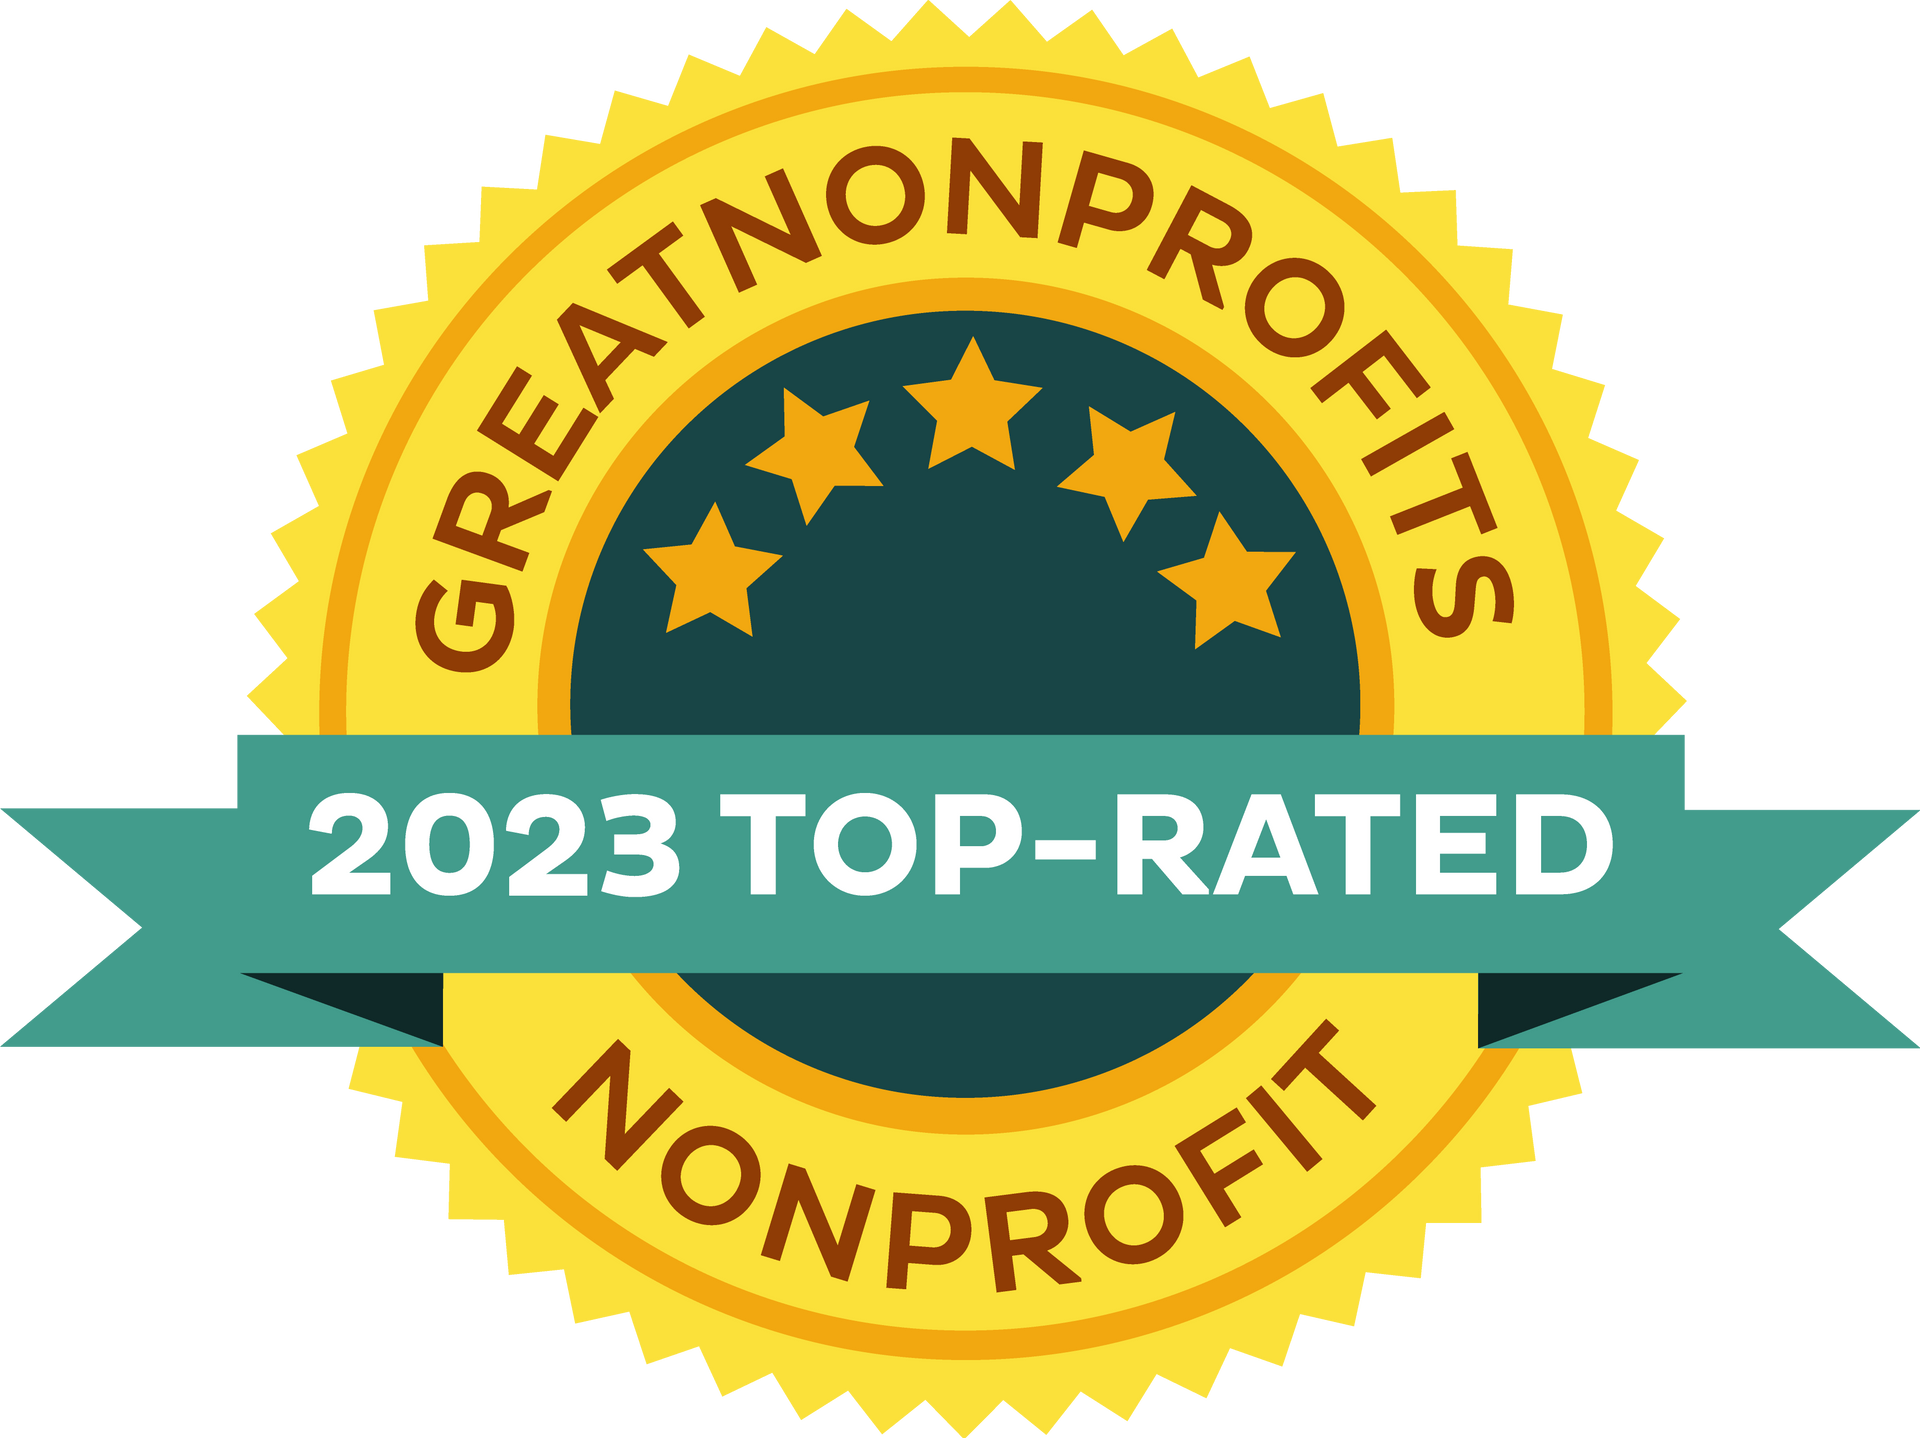 Congrats, College of Adaptive Arts you're a top-rated nonprofit!